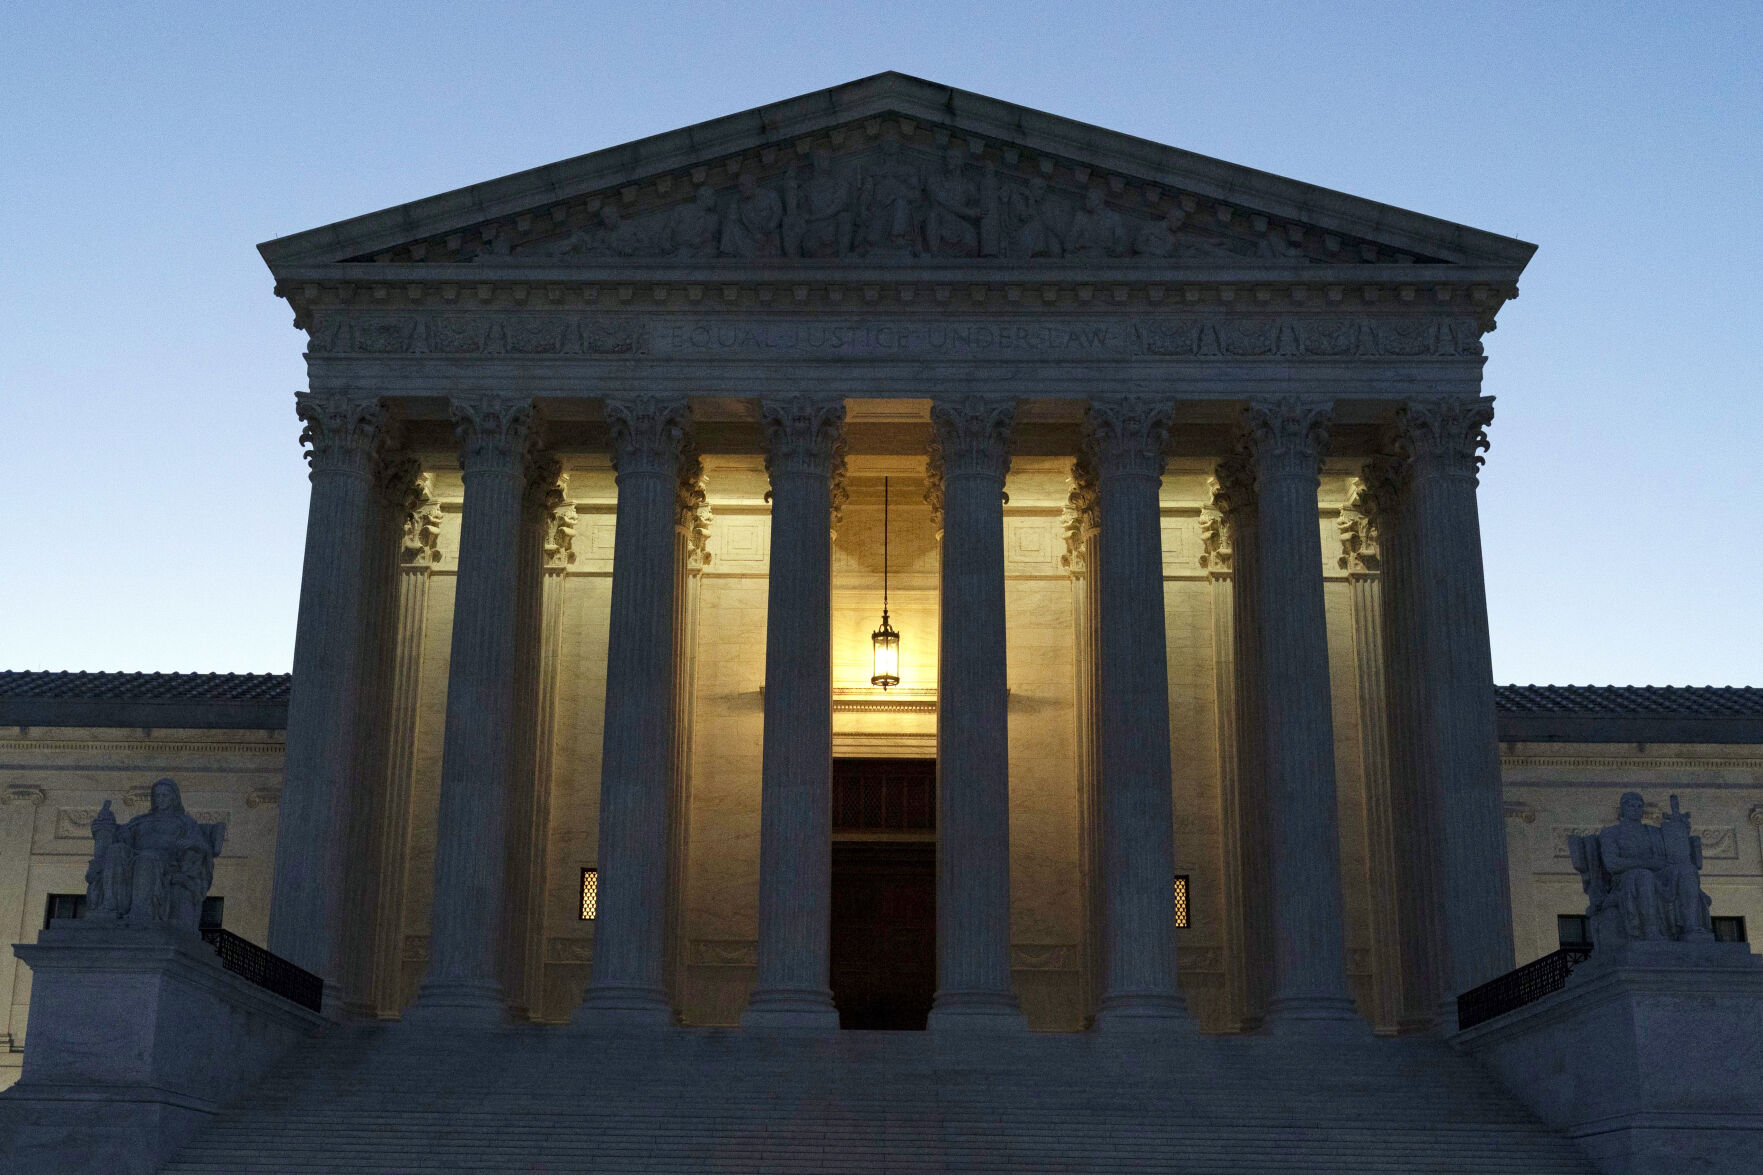 <p>FILE - The U.S. Supreme Court is seen before sunrise on Capitol Hill in Washington, March. 21, 2022. On Dec. 4, 2023, the Supreme Court will hear arguments over a nationwide settlement with OxyContin maker Purdue Pharma that would shield members of the Sackler family who own the company from civil lawsuits over the toll of opioids.(AP Photo/Jose Luis Magana, File)</p>   PHOTO CREDIT: Jose Luis Magana 